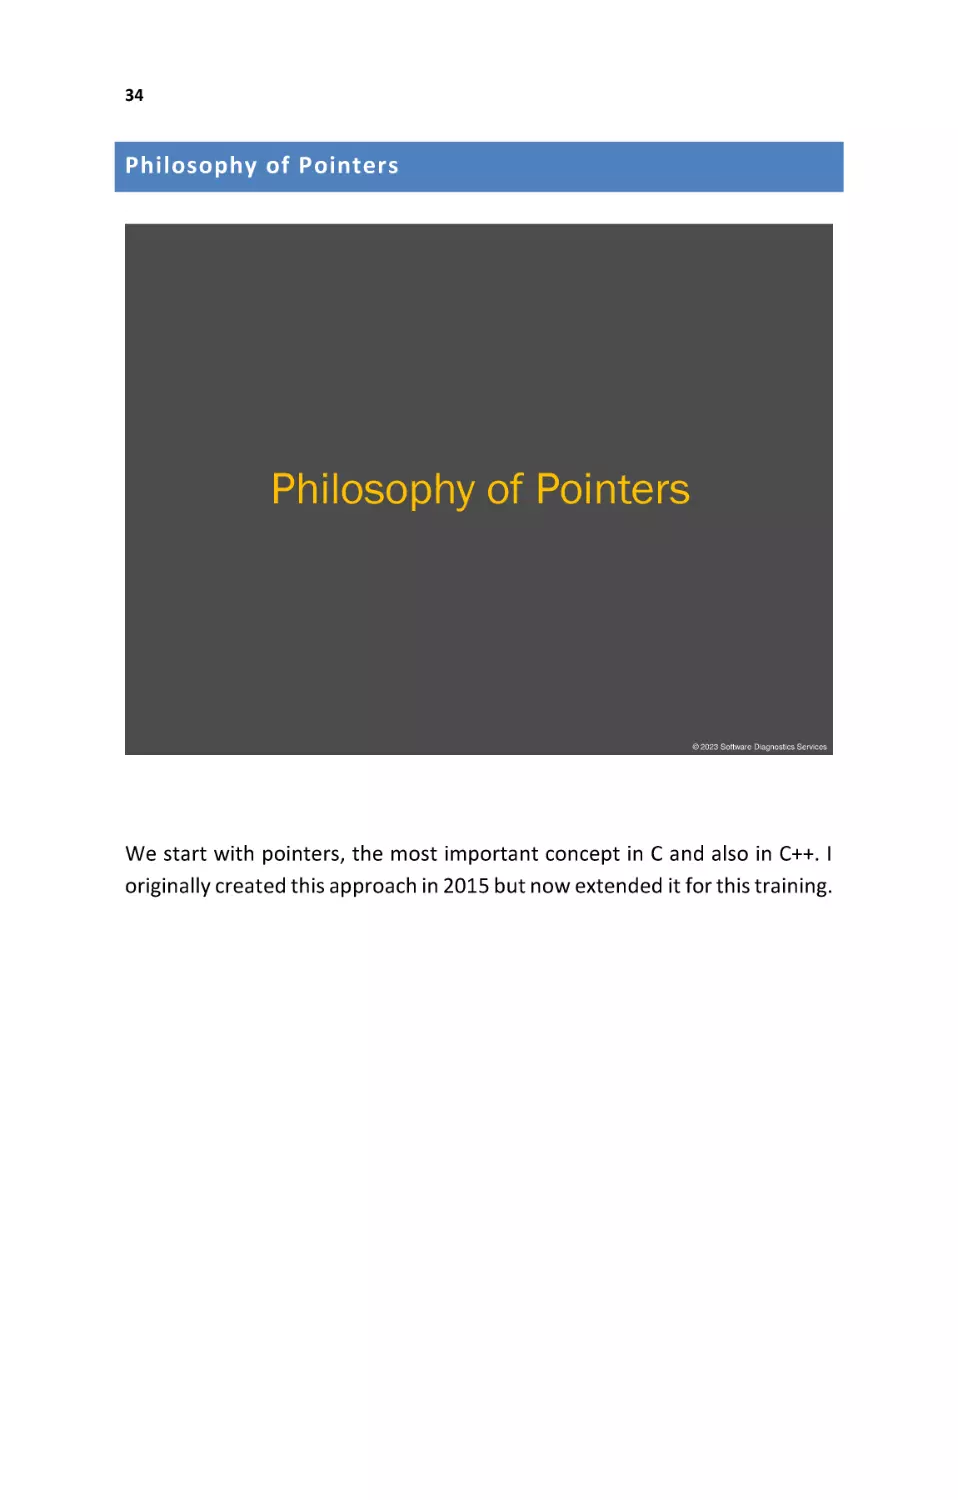 Philosophy of Pointers